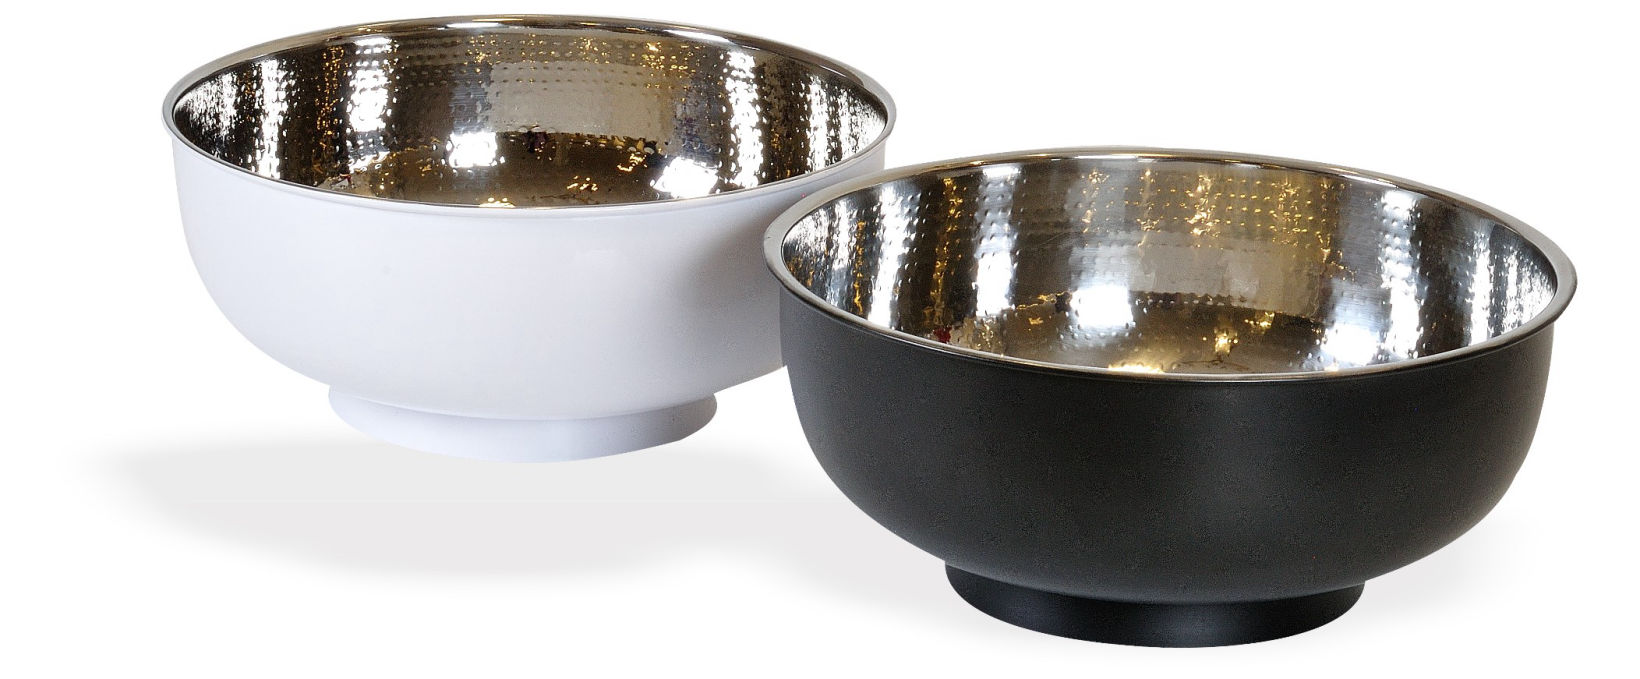 Spavision | Powder Coated Stainless Steel Foot Wash Bowls